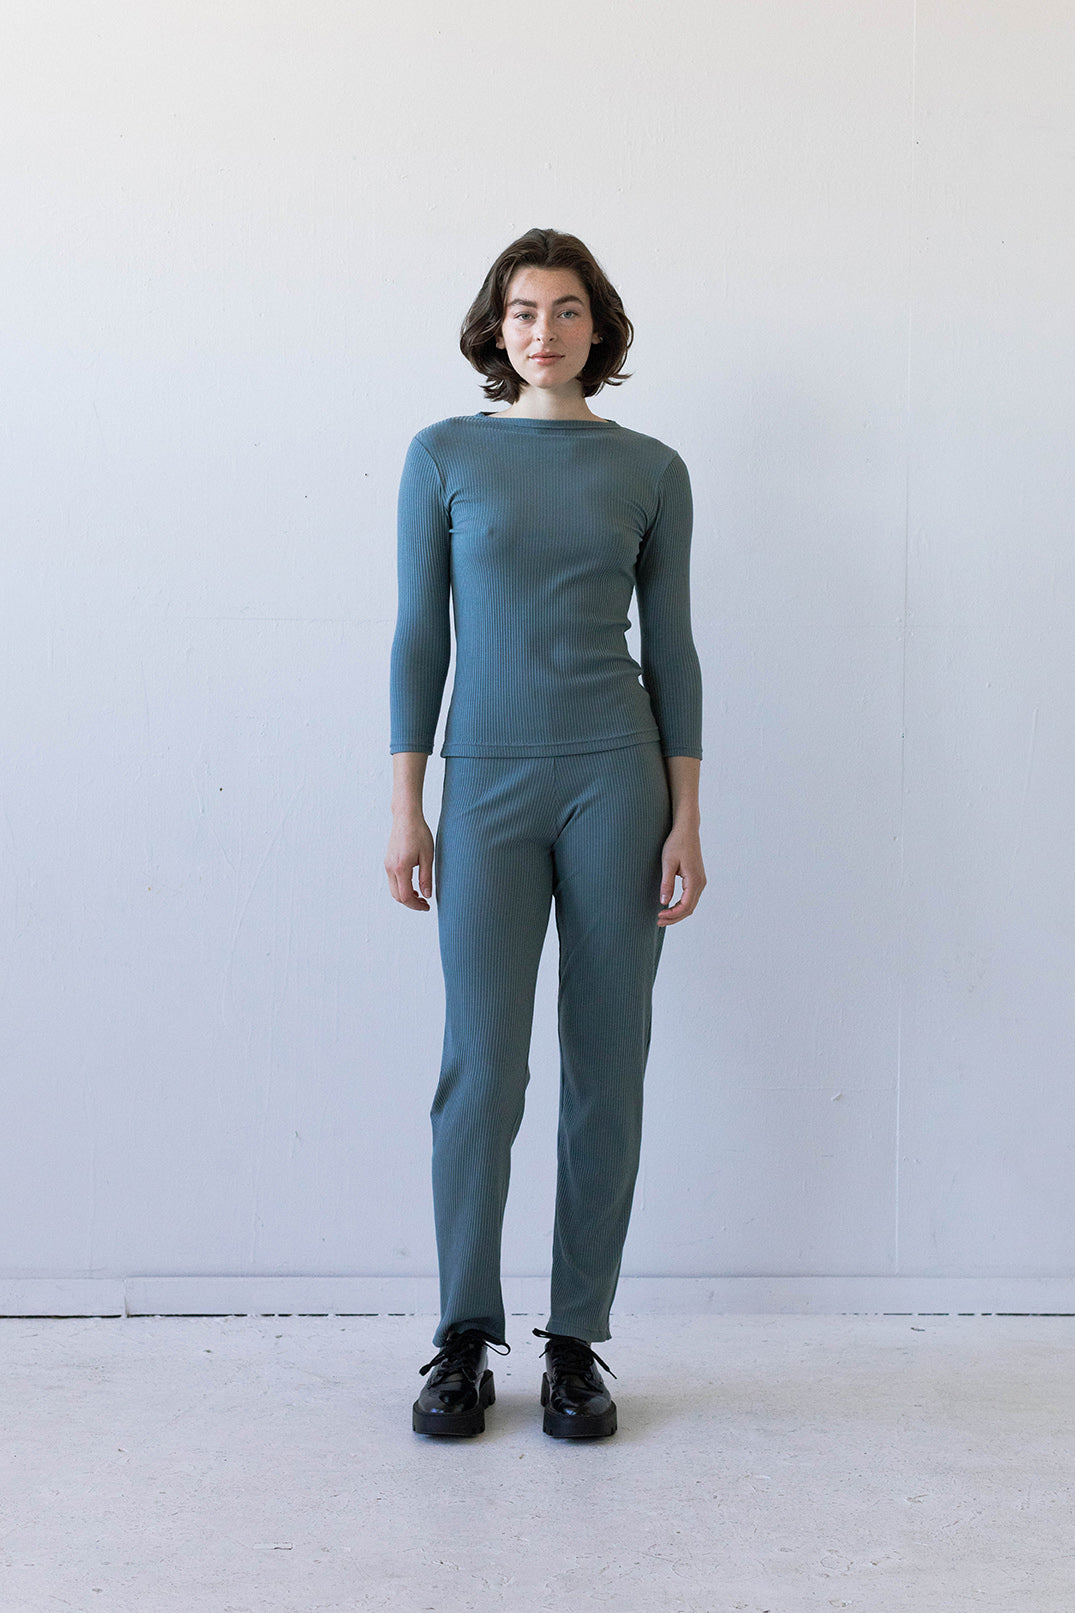 SAMPLE SALE - Elio Lounge Pant in Dusty Blue Rib Knit - SMALL/STANDARD